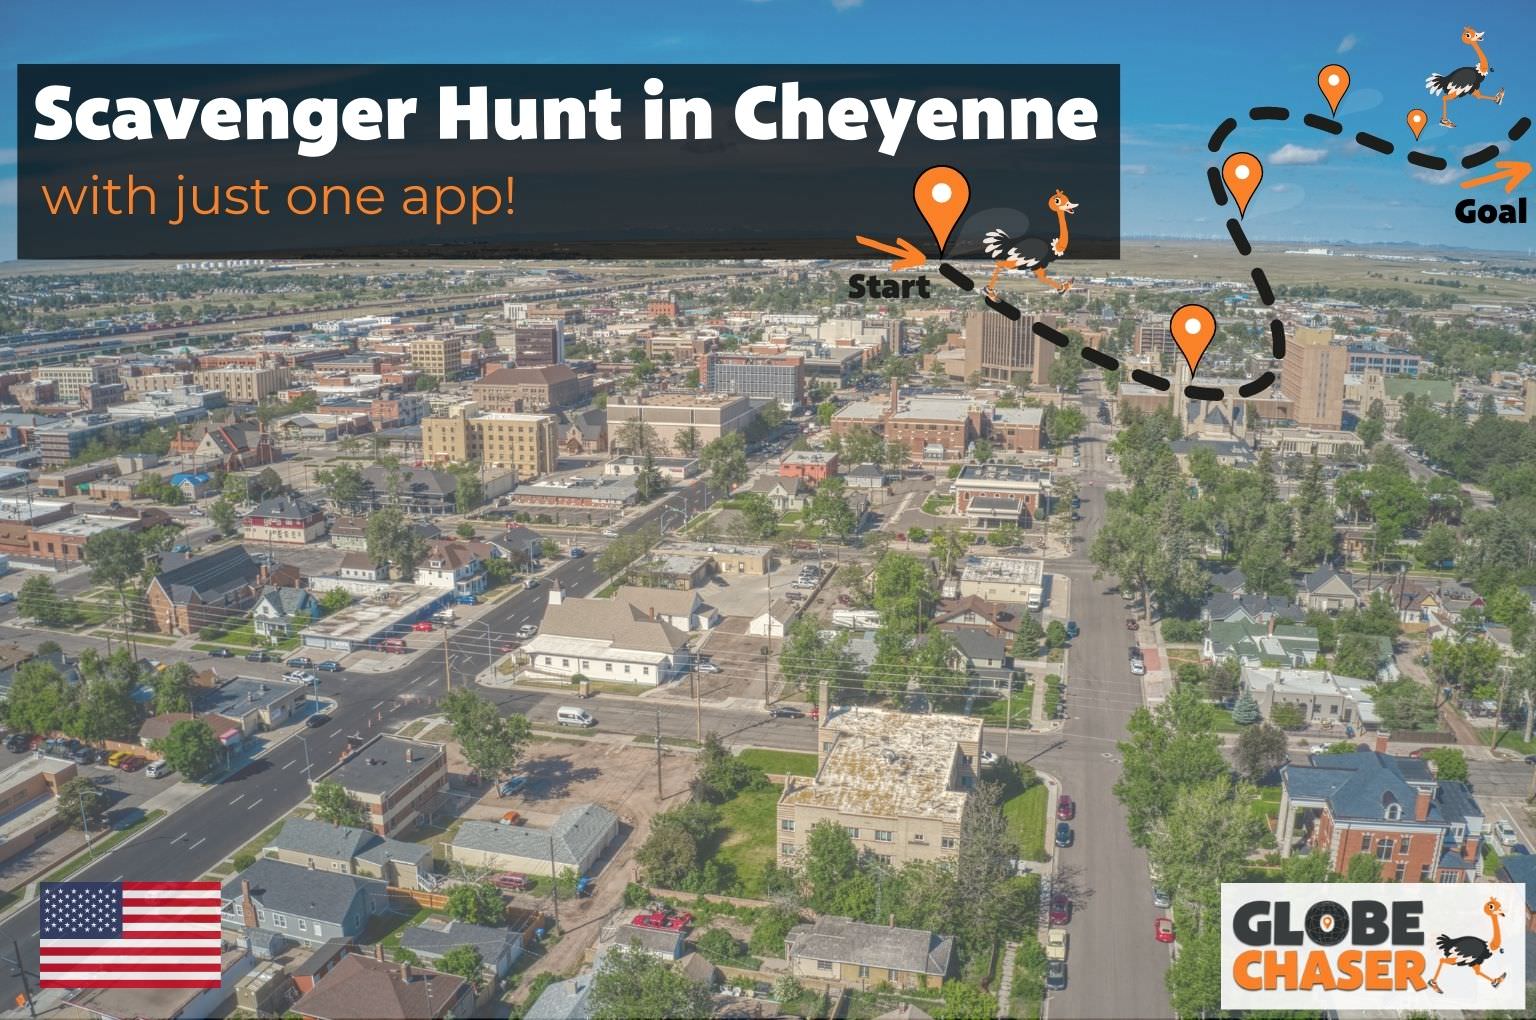 Scavenger Hunt in Cheyenne, USA - Family Activities with the Globe Chaser App for Outdoor Fun